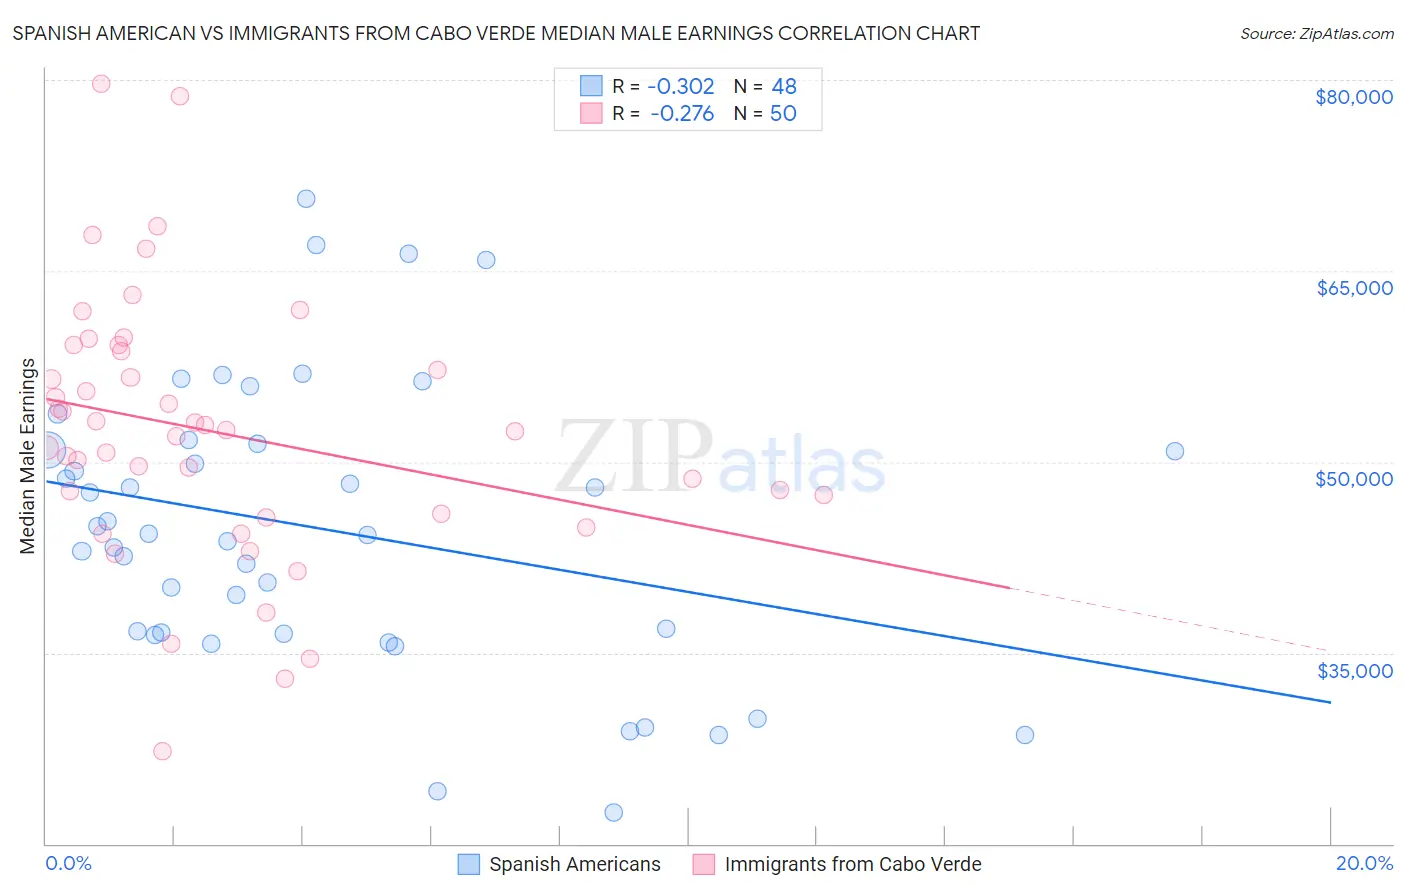 Spanish American vs Immigrants from Cabo Verde Median Male Earnings